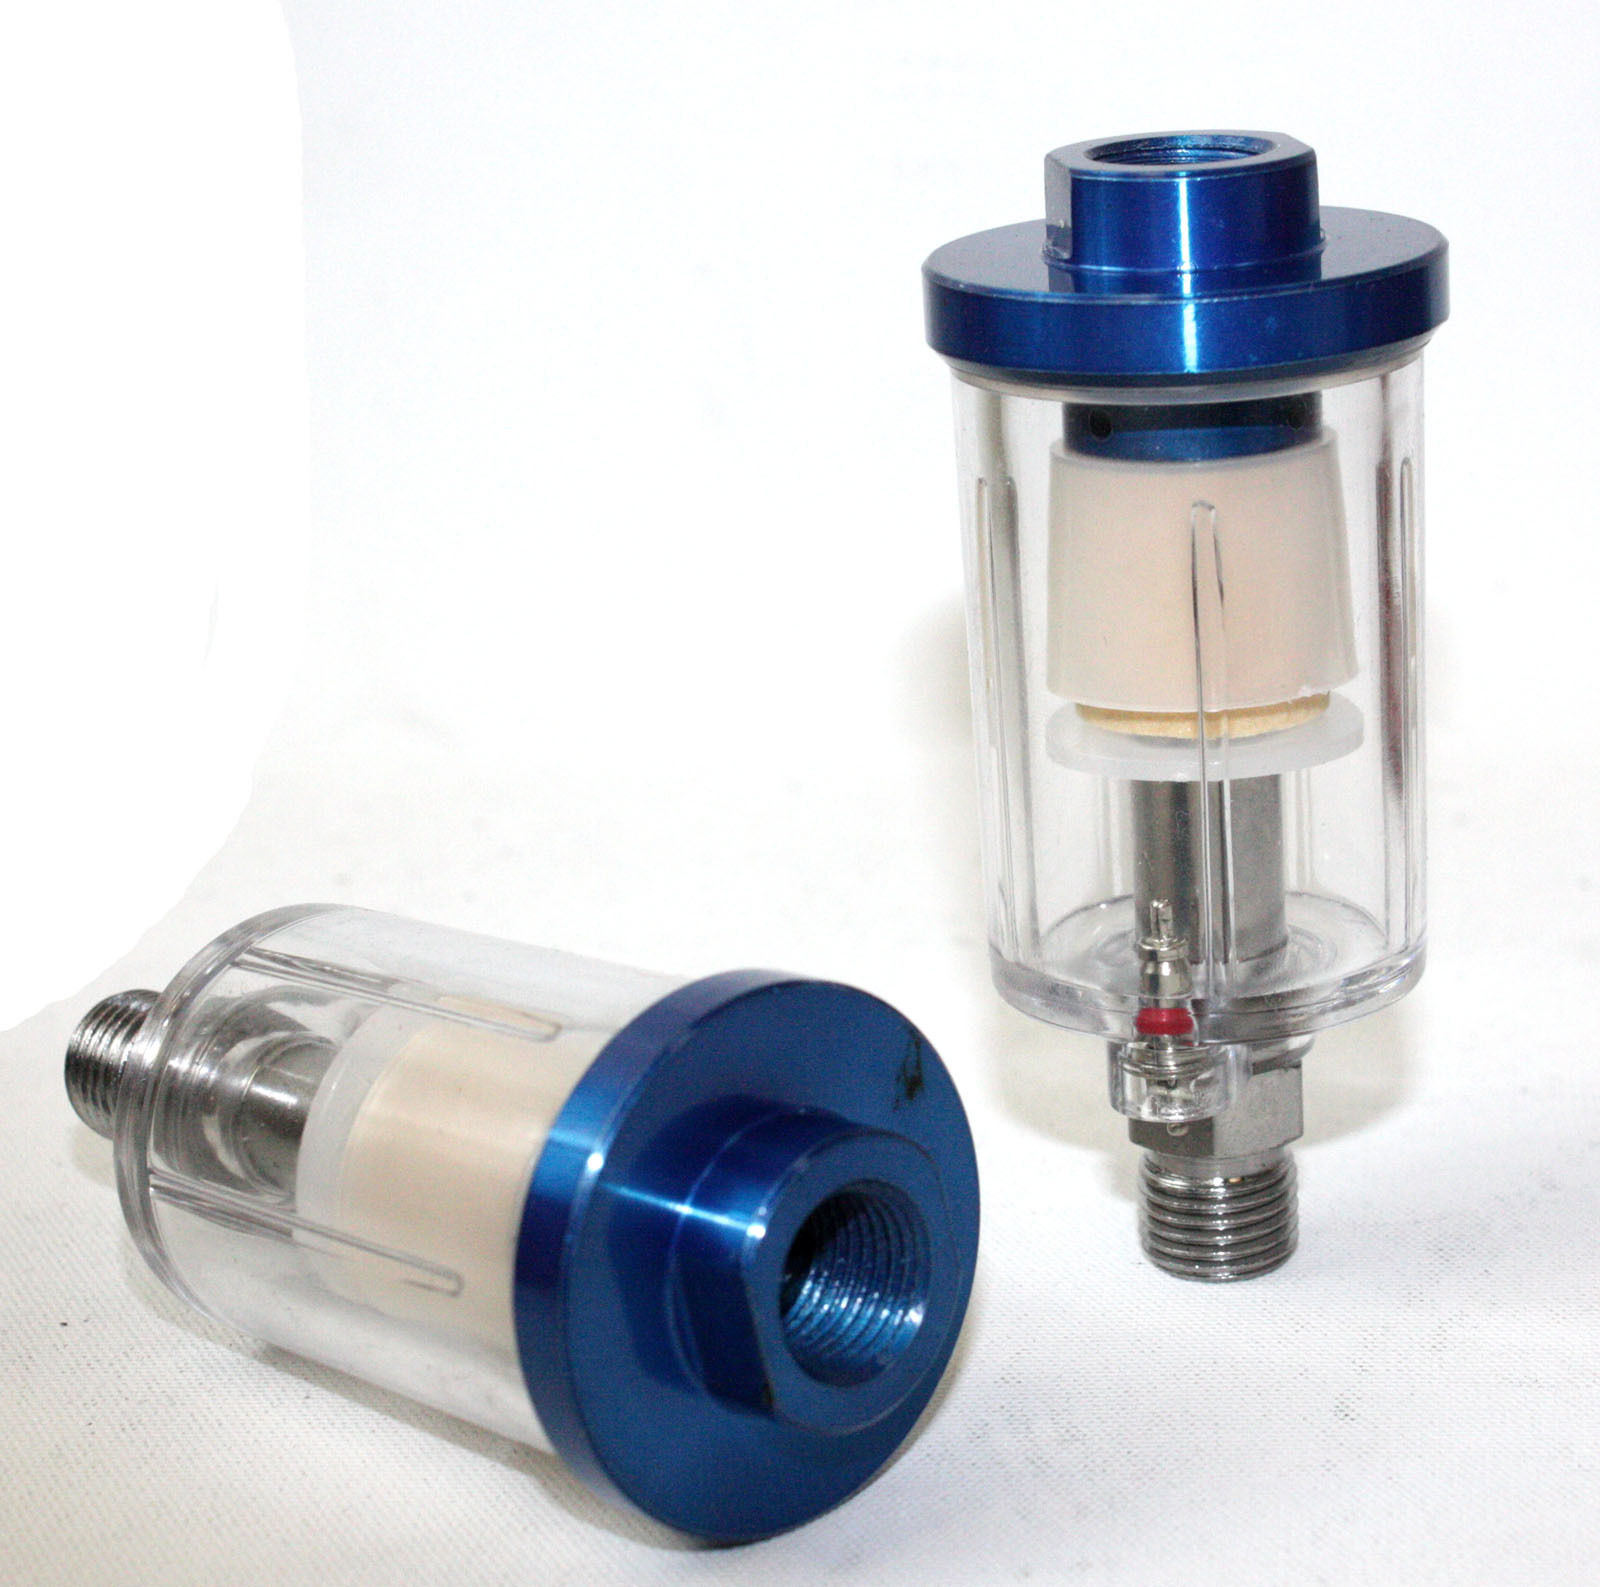 New Air Oil & Water Separator Trap Filter Seperator 1/4" NPT Air Cleaning 150PSI 